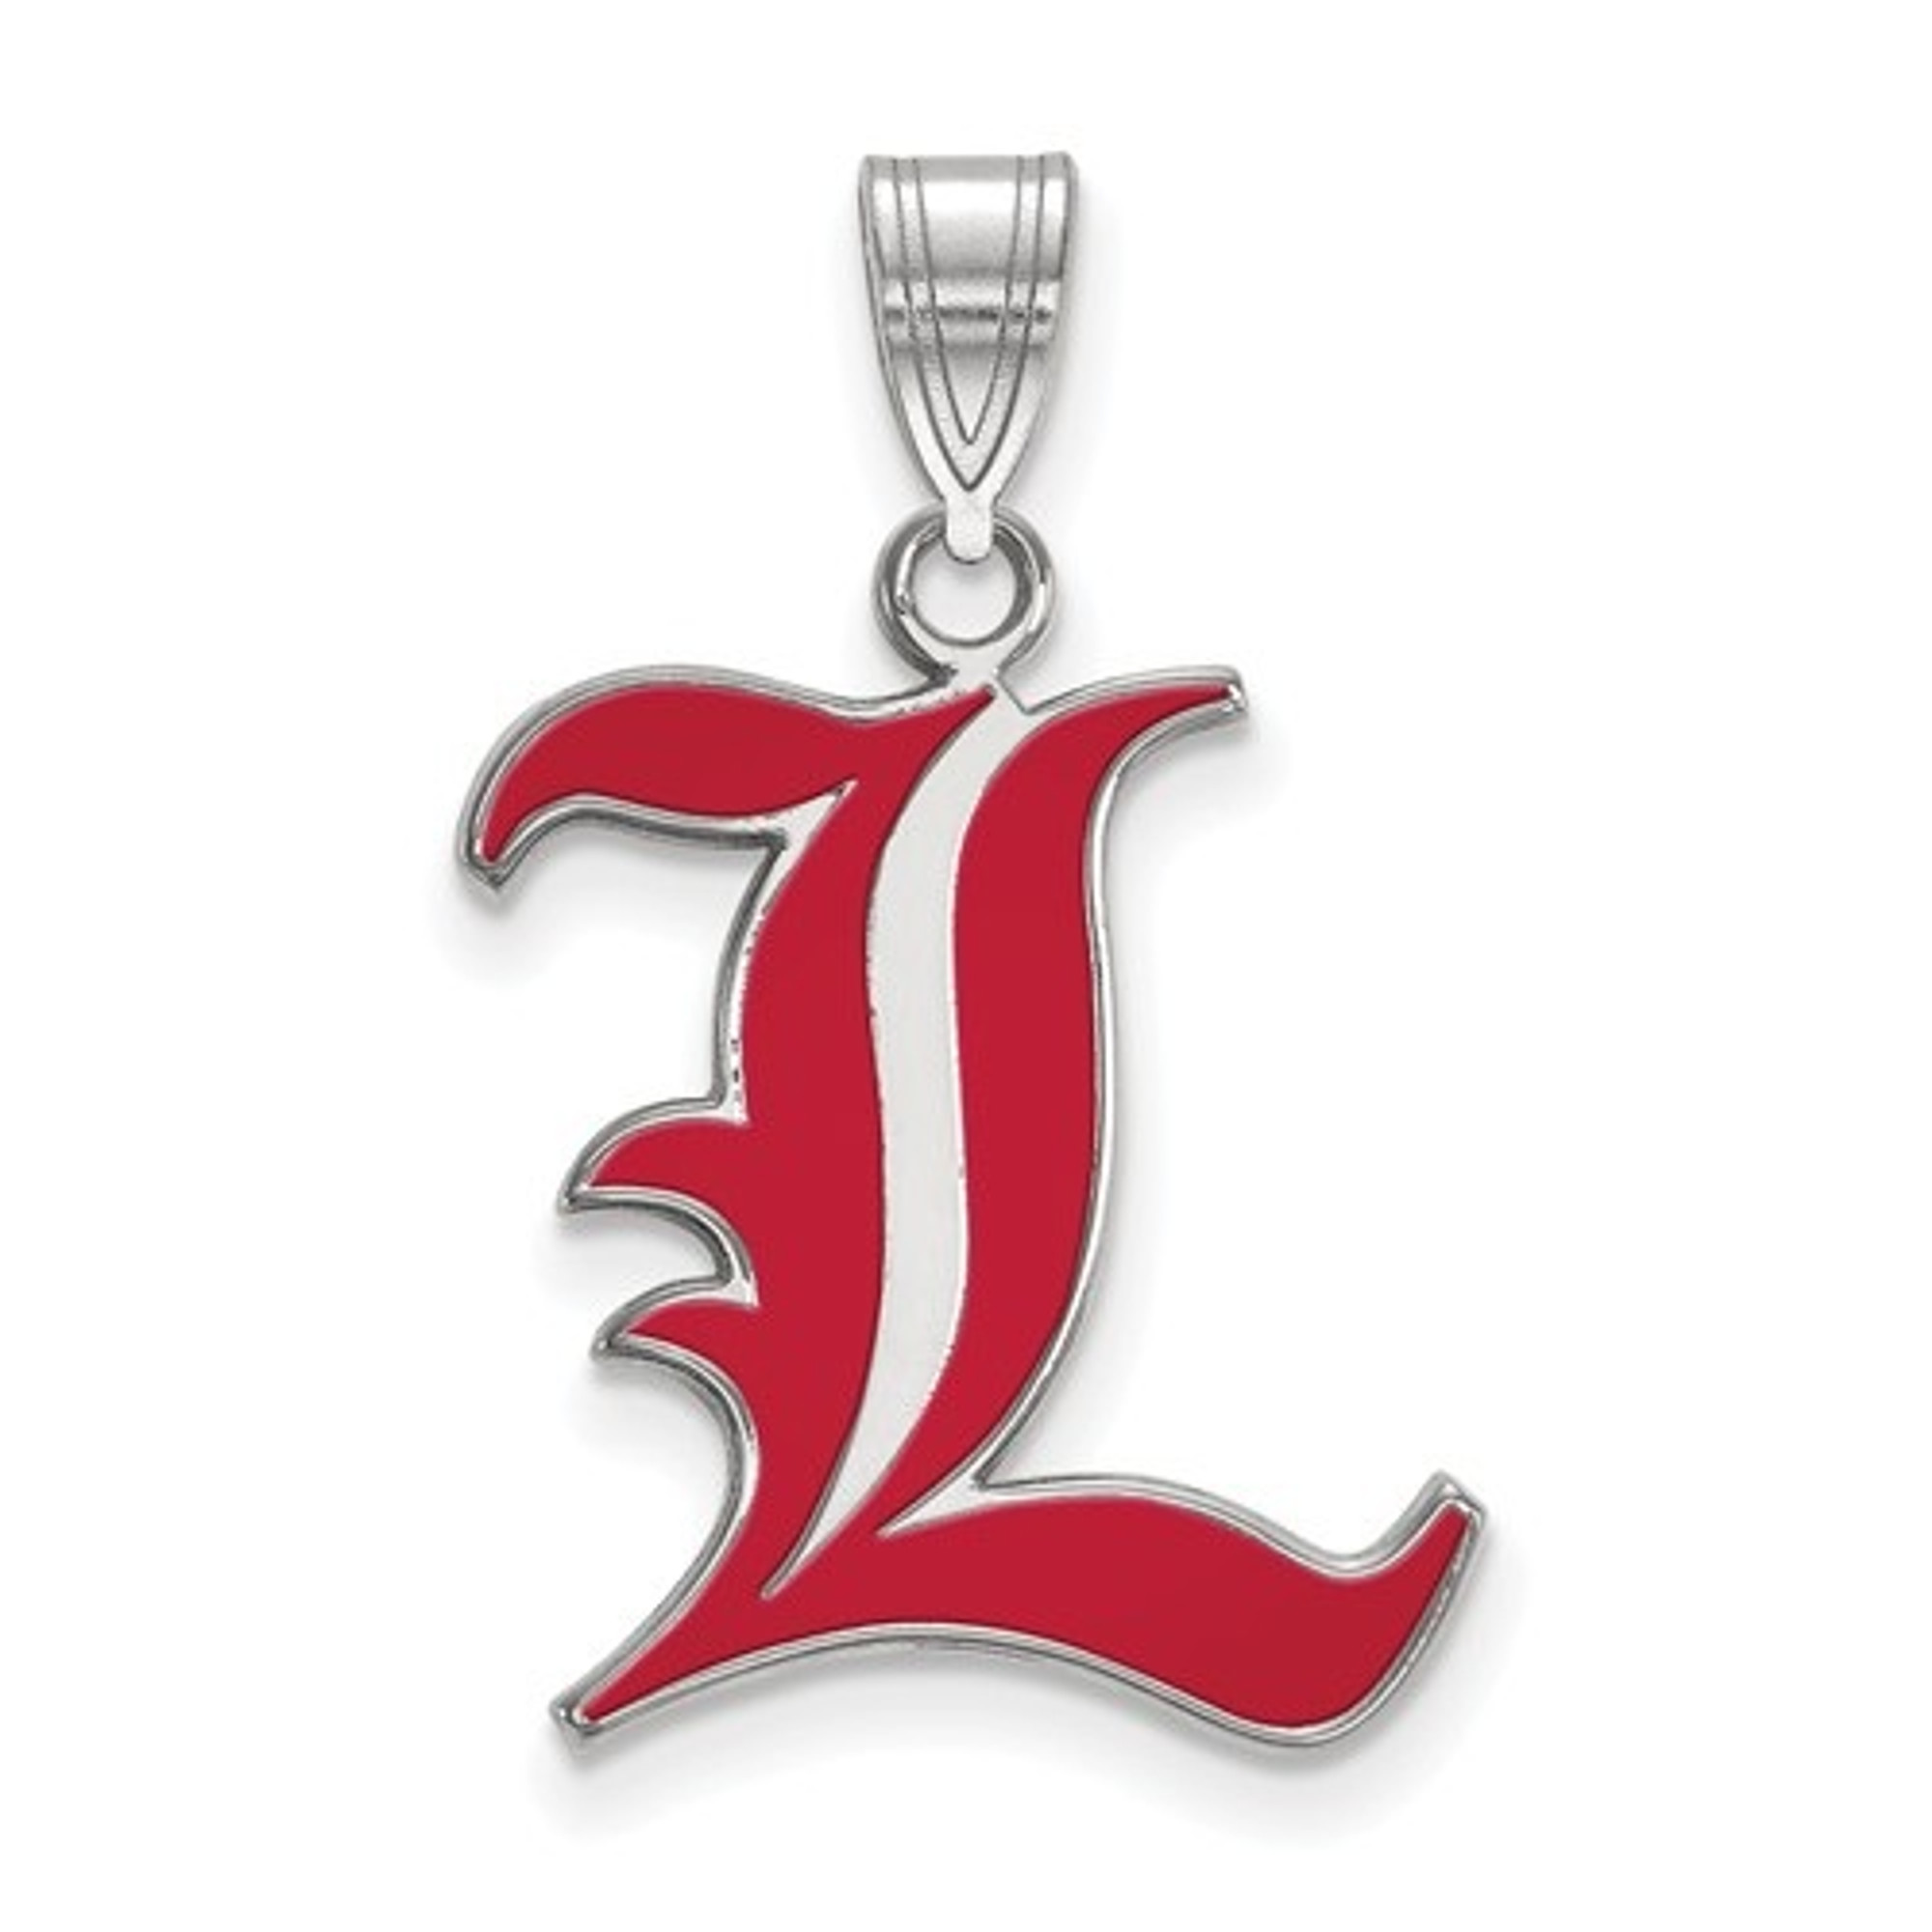 Louisville Cardinals Sterling Silver and Enamel Charm